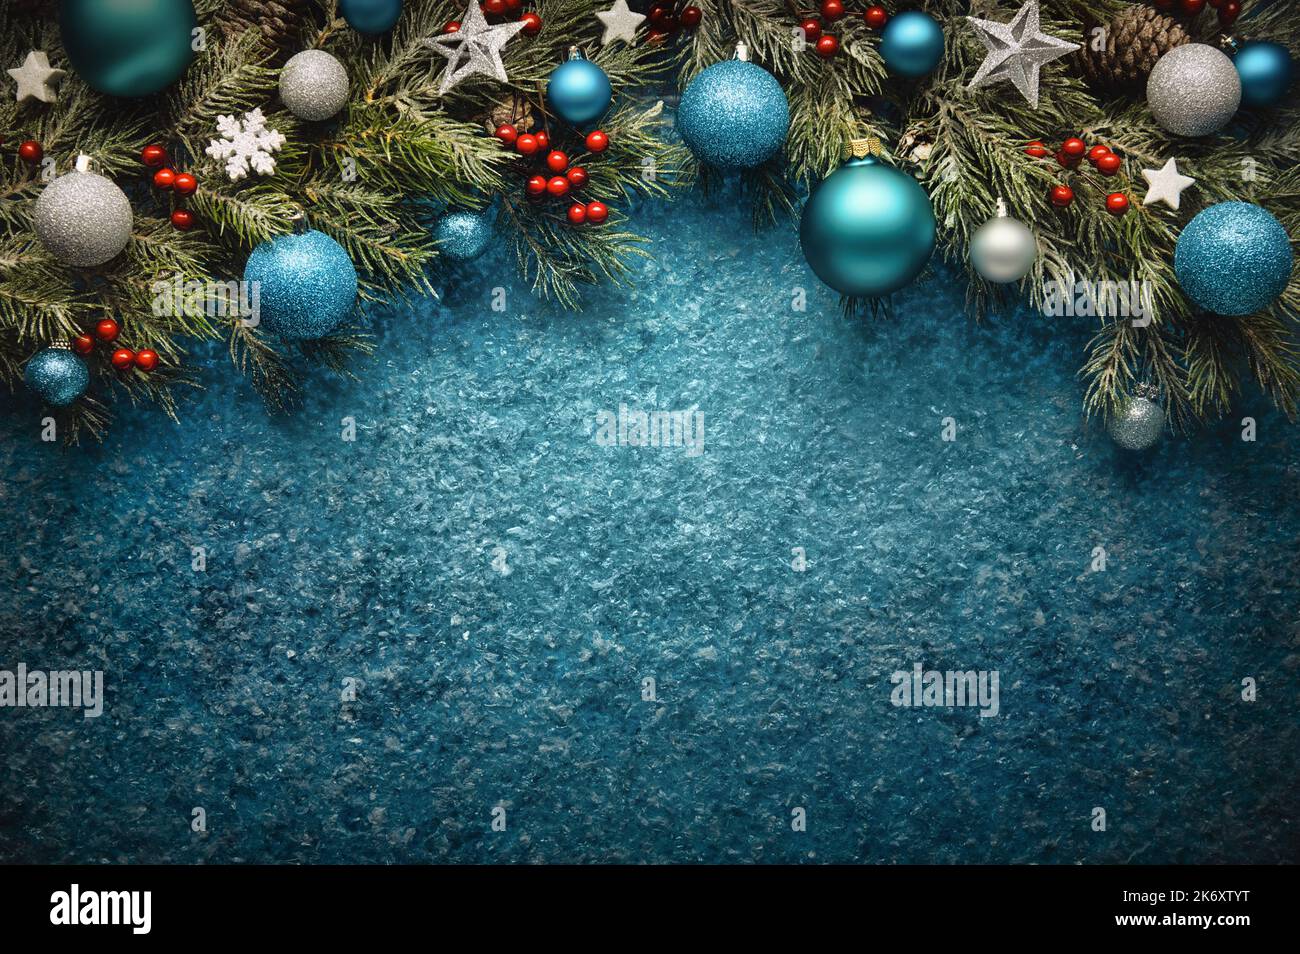 Christmas background in turquoise blue, with textured copy-space and an arch-shaped border composed of fir branches, baubles, stars and holly Stock Photo